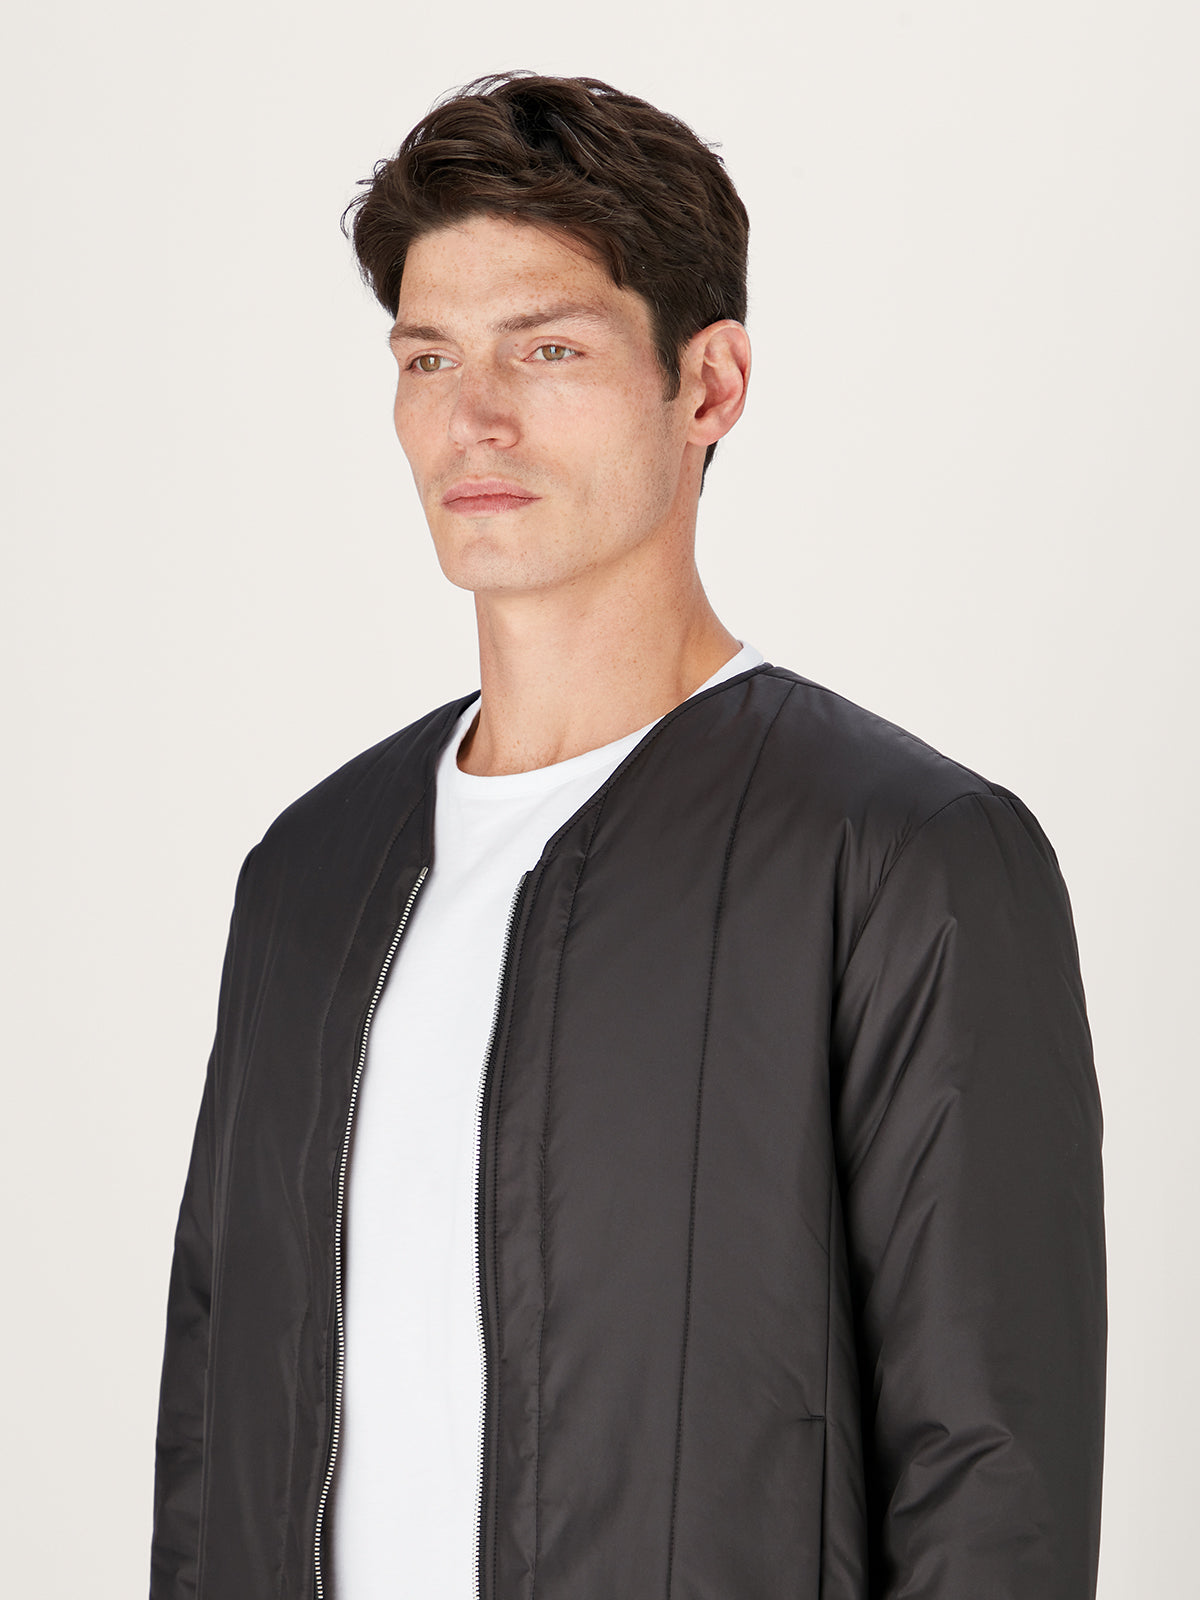 The Modular Jacket || Black | Recycled Polyester